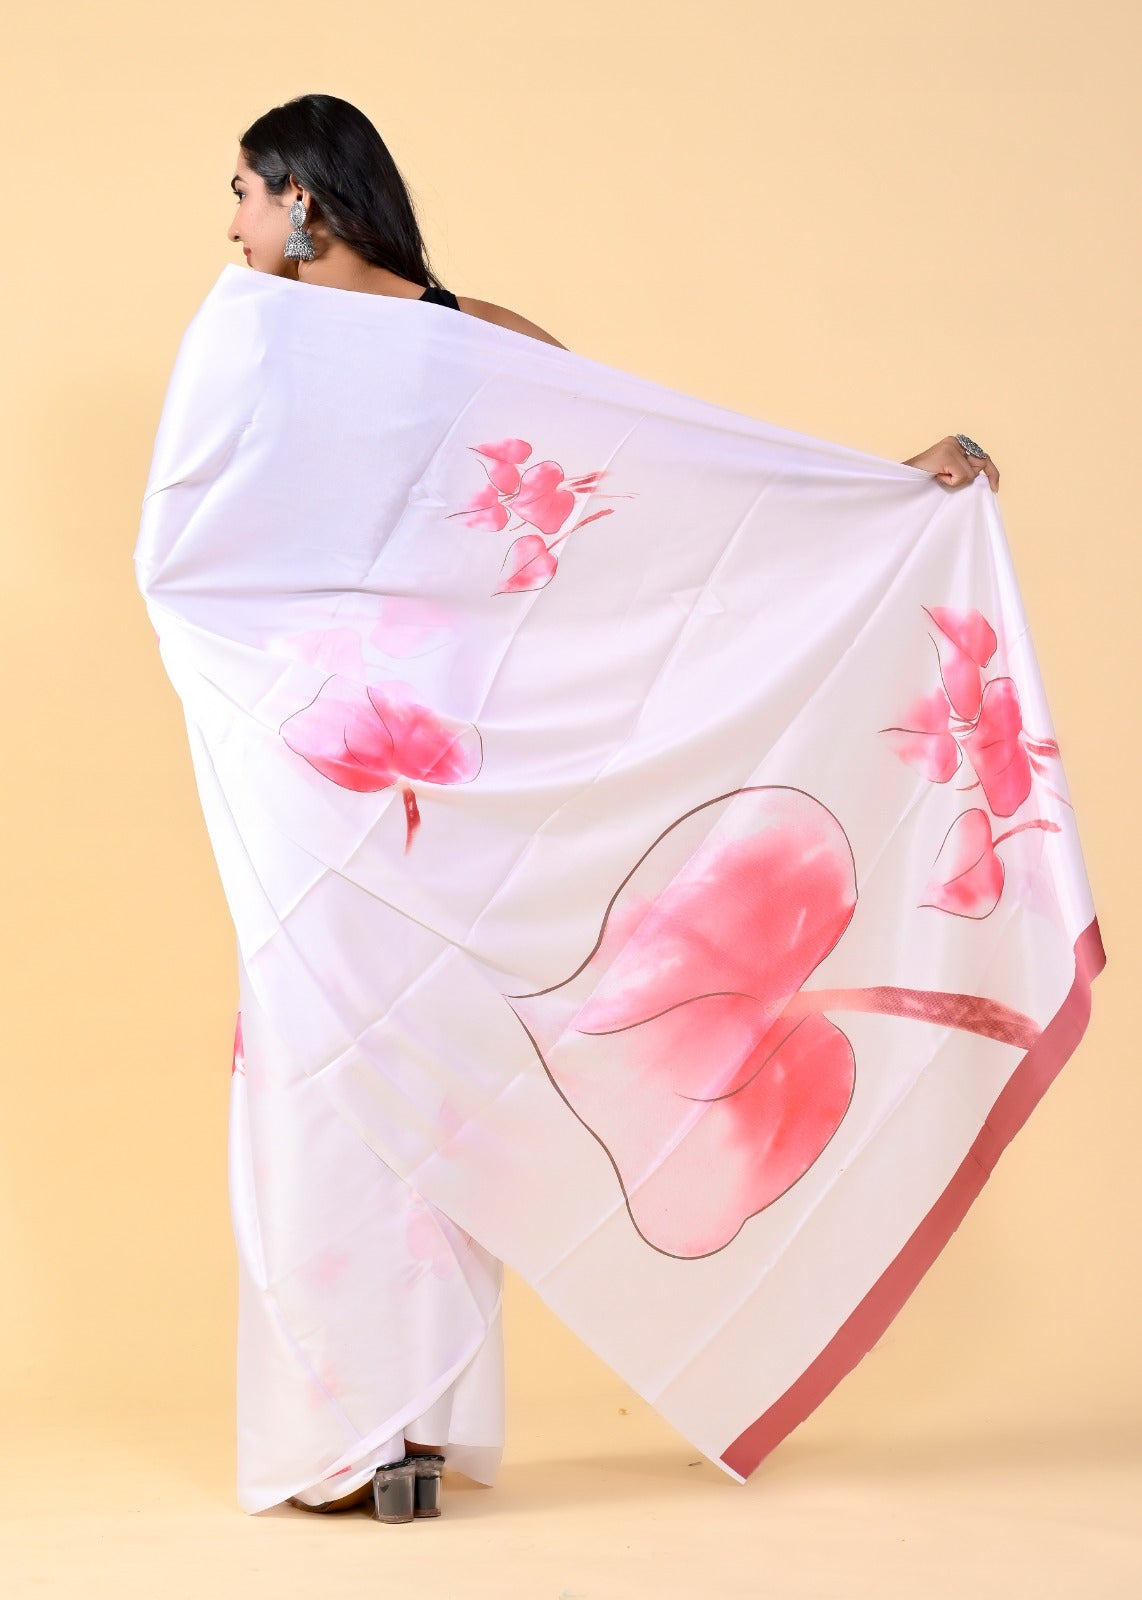 Celebrate tradition with a touch of contemporary: Lucaya Vol 2 Silk Saree - The epitome of sophistication and charm